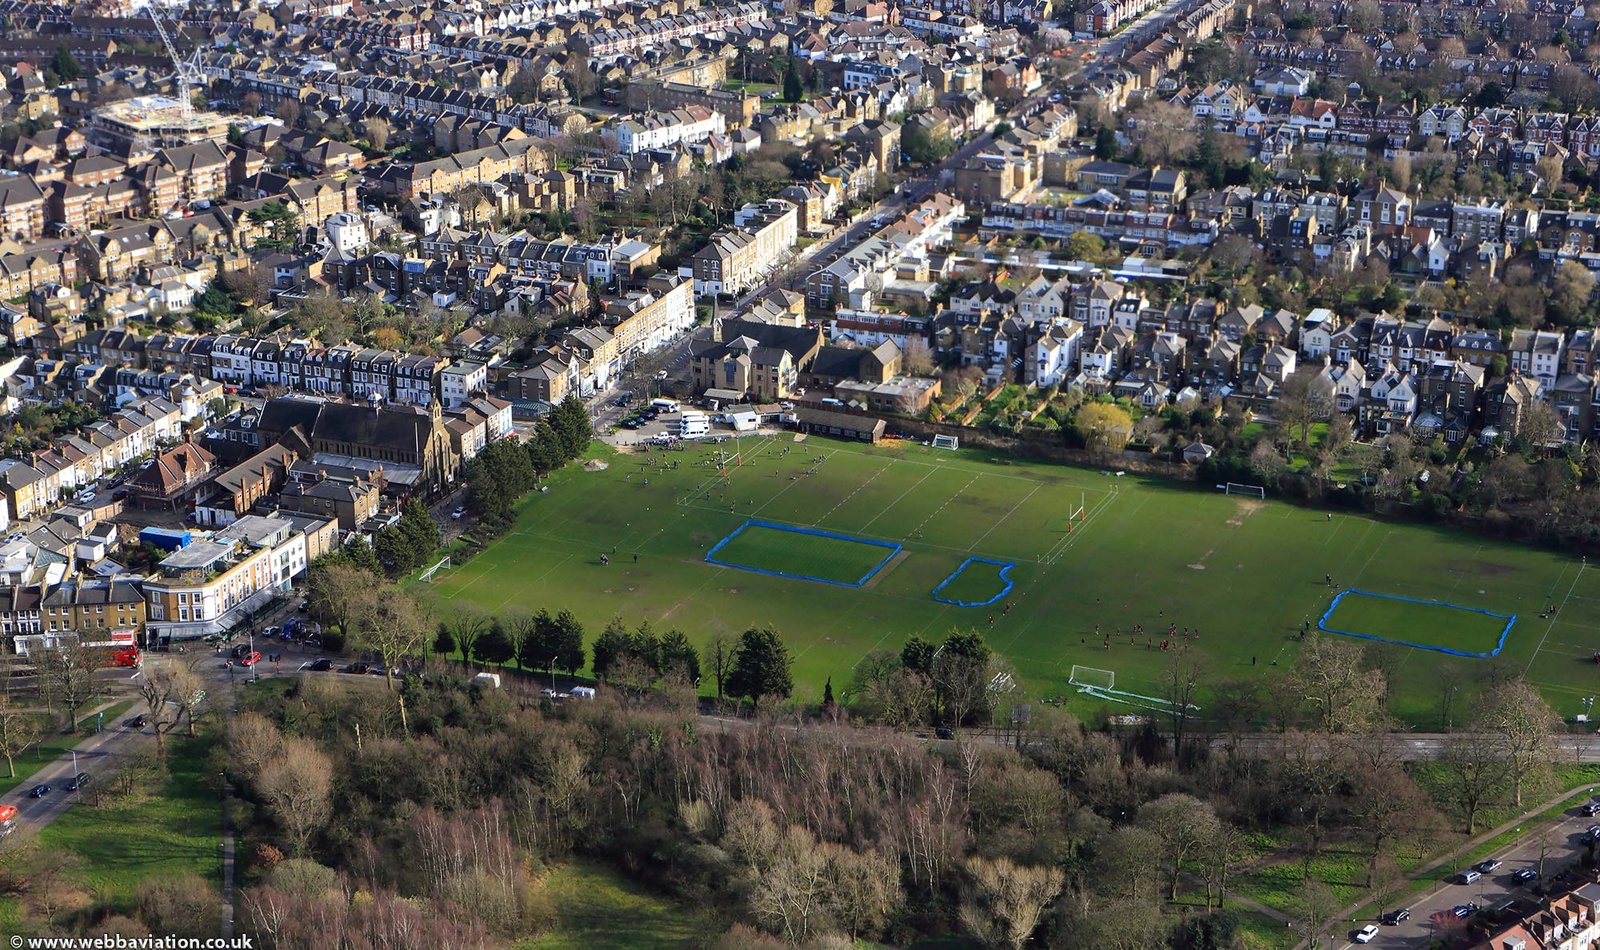 Sir Walter St Johns Sports Ground Wandsworth from the air